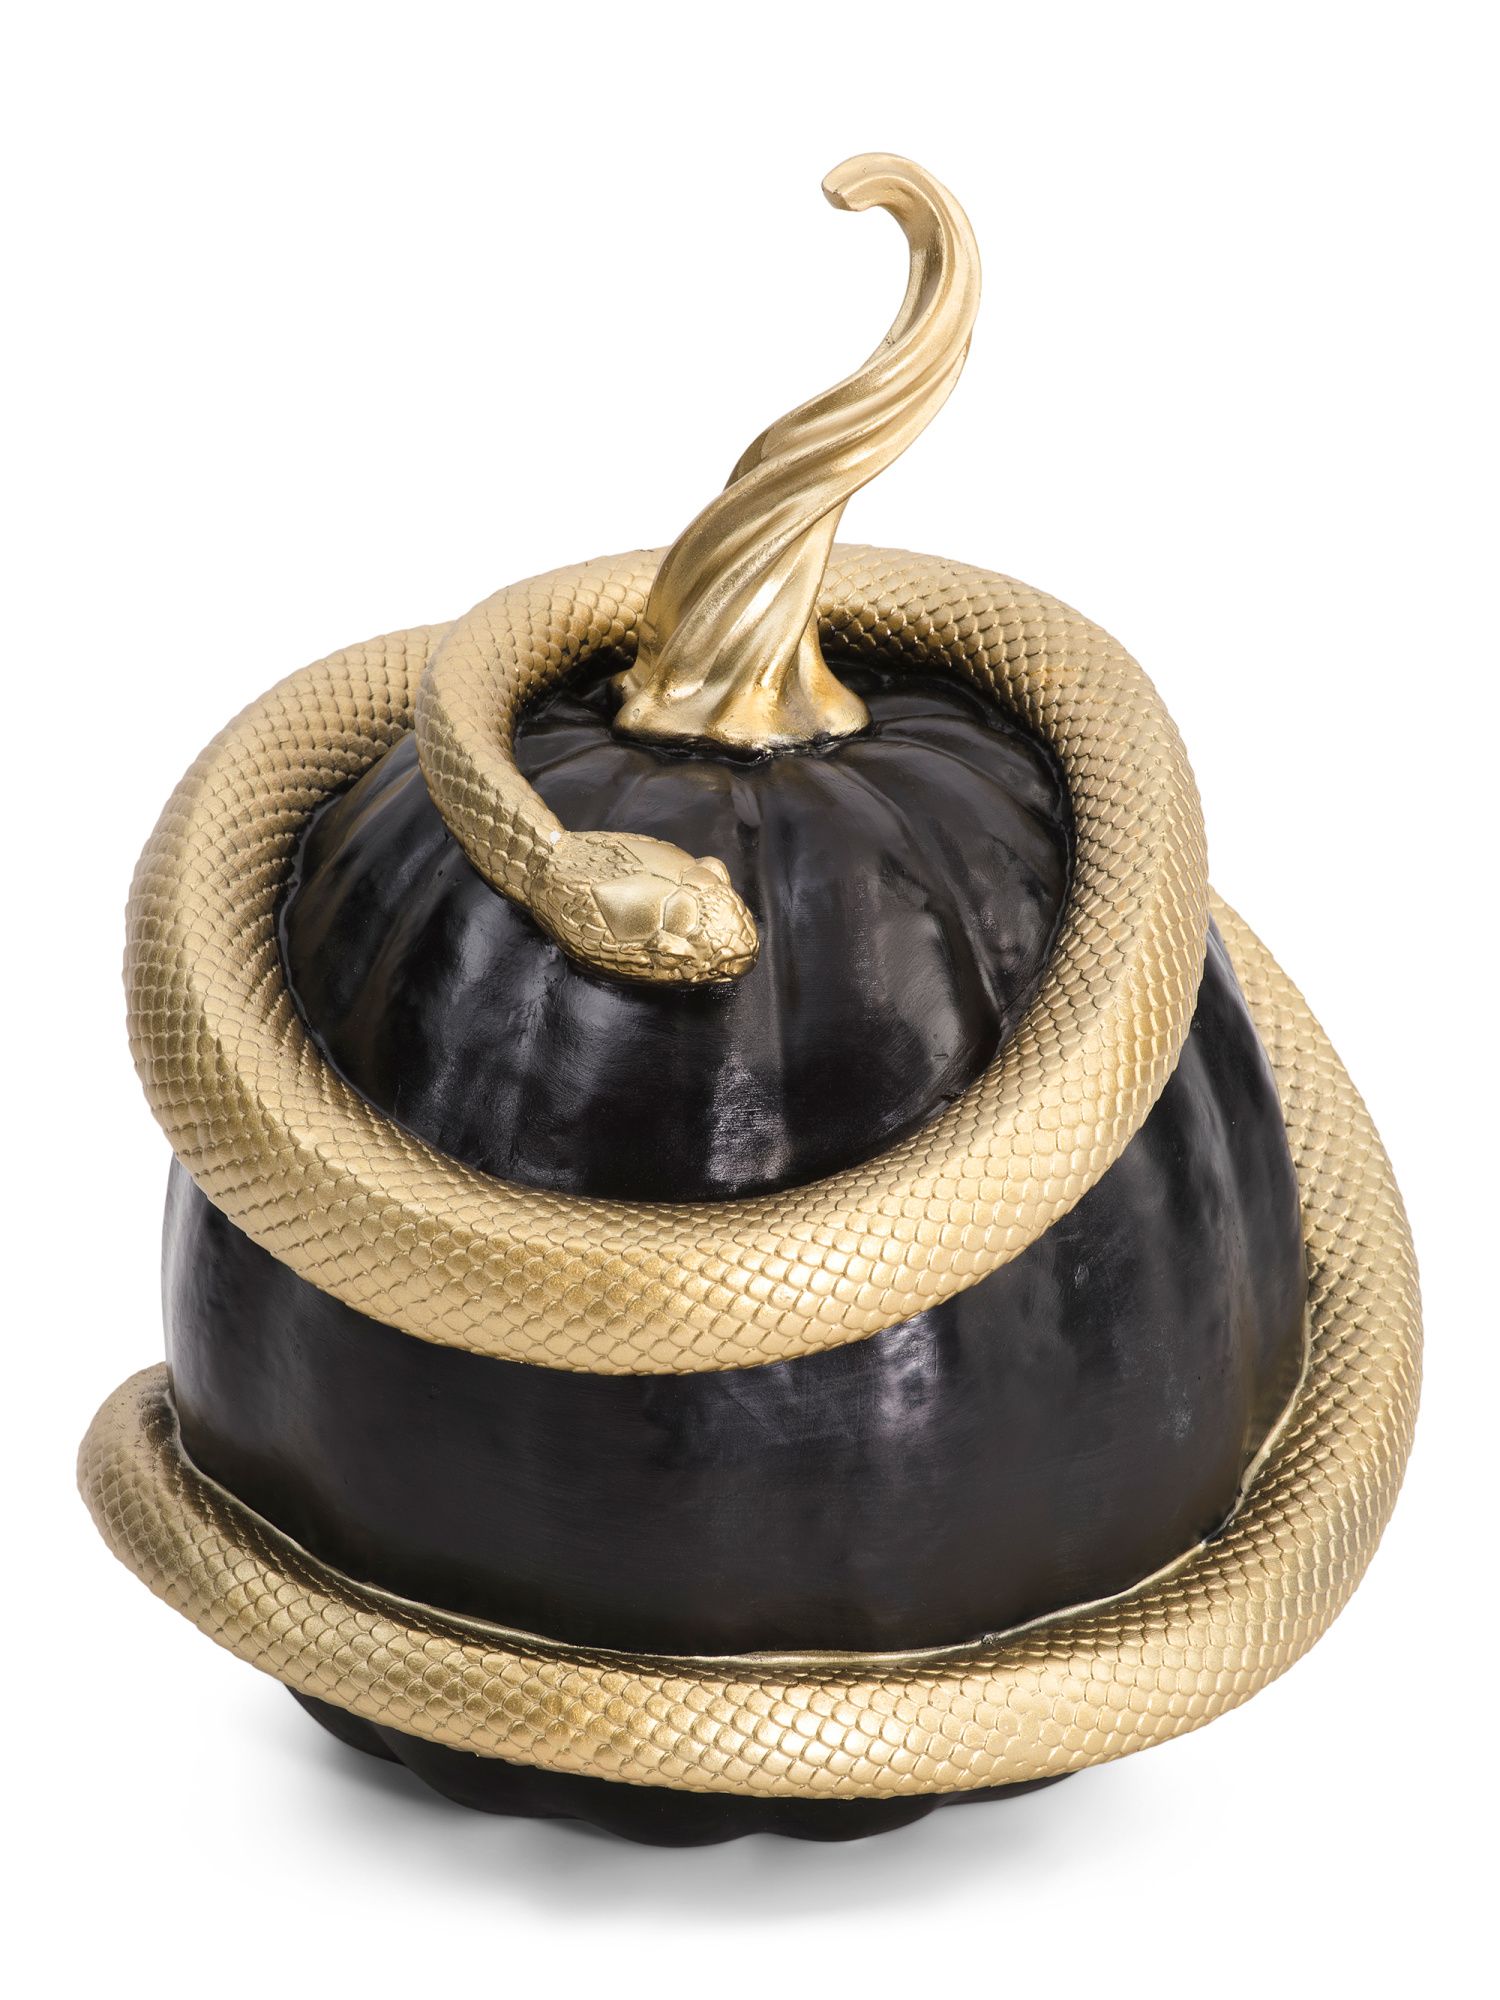 13.4in Resin Pumpkin Wrapped With Snake | TJ Maxx